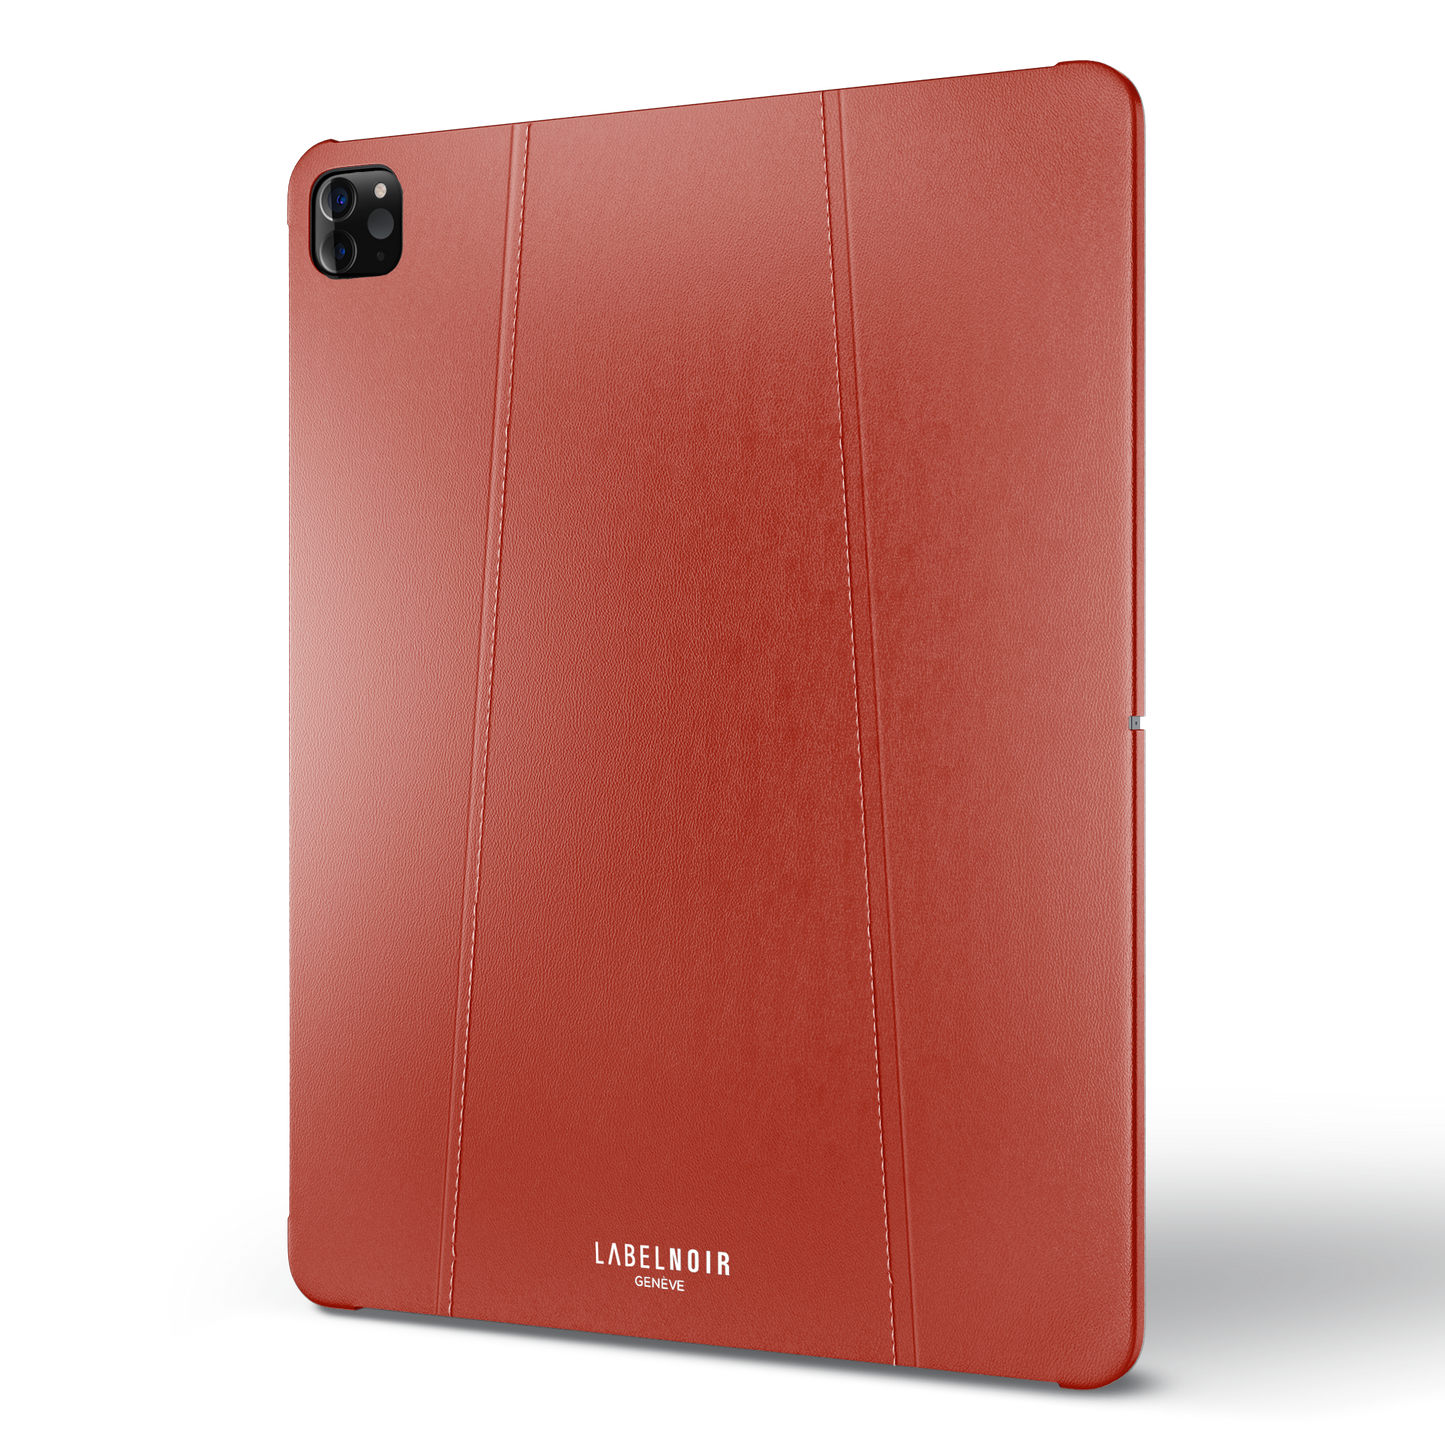 Ipad Pro (2nd-3rd-4th Gen) 11-inch Red Leather Case